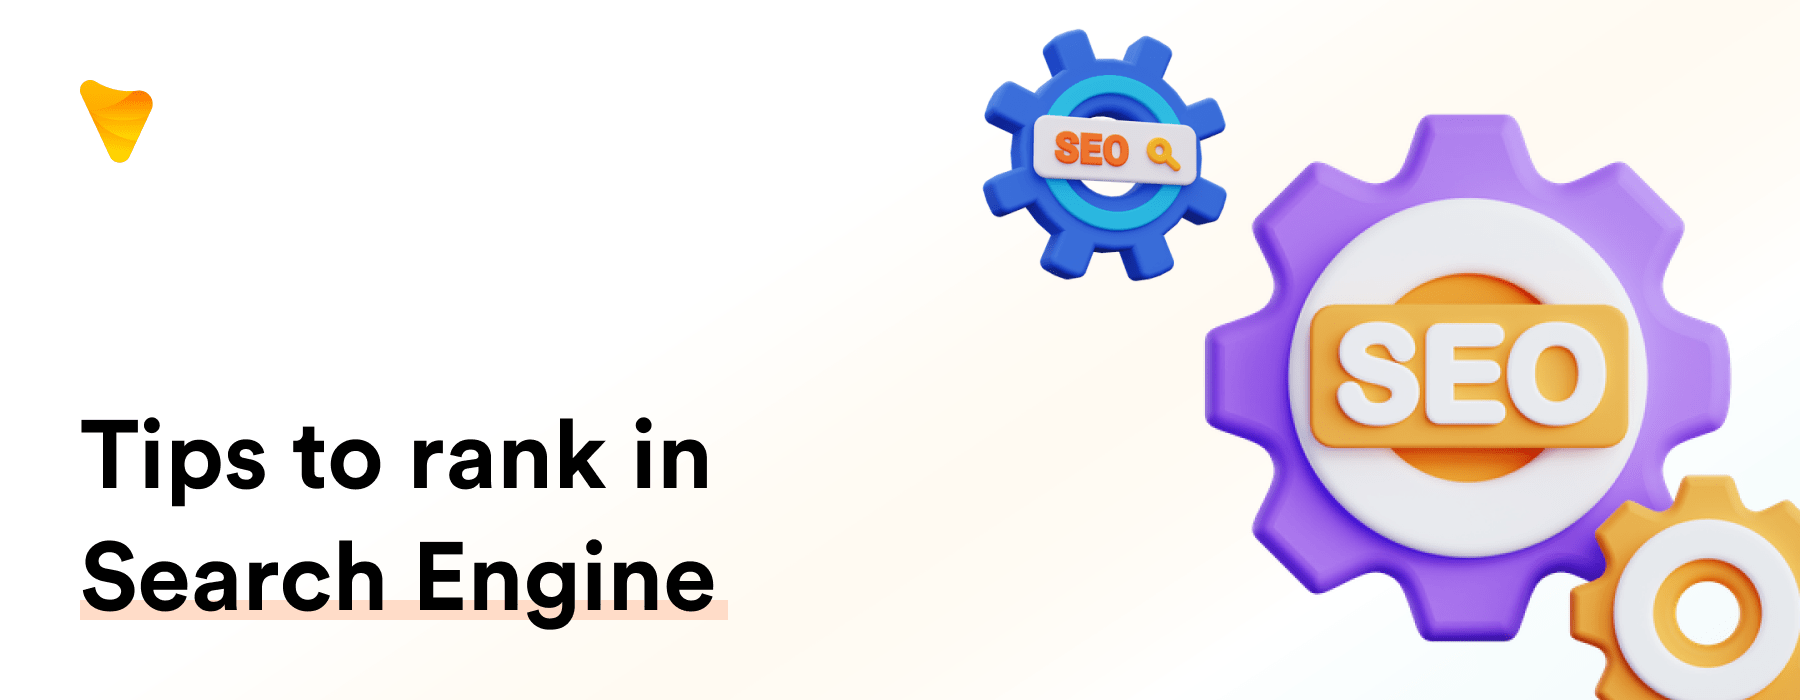 tips to rank in search engine banner